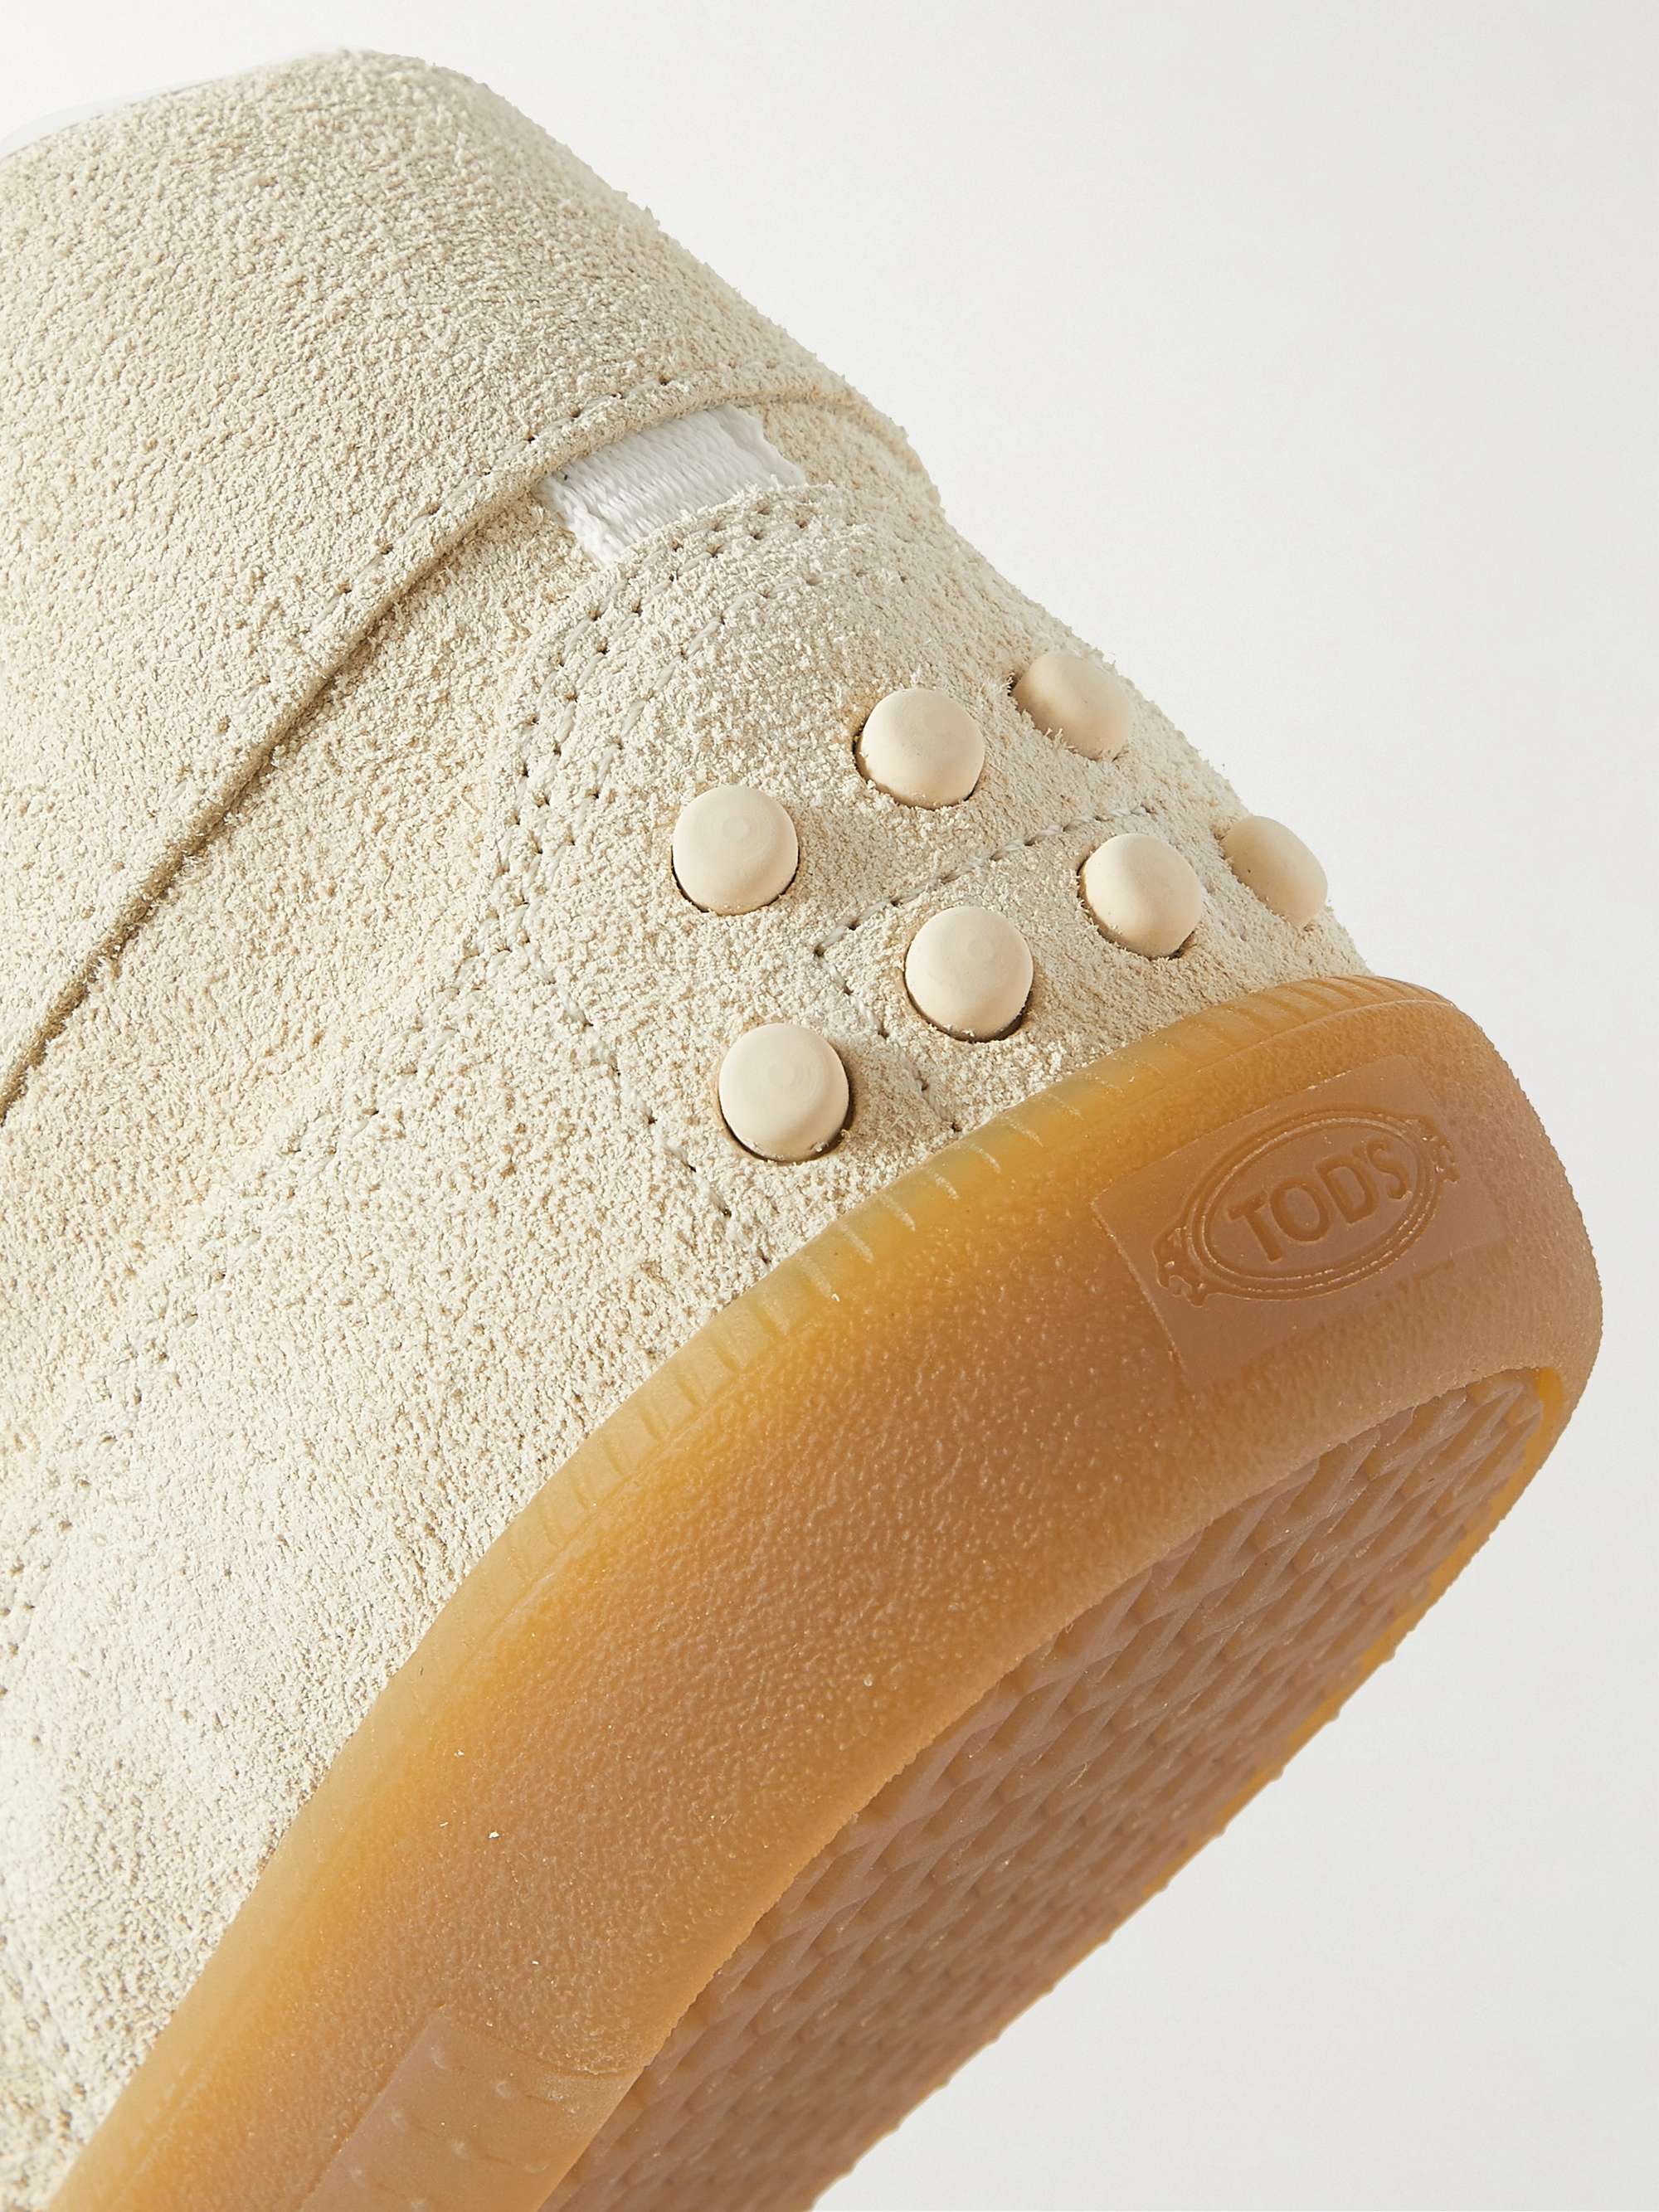 TOD'S Logo-Debossed Leather-Trimmed Suede Sneakers